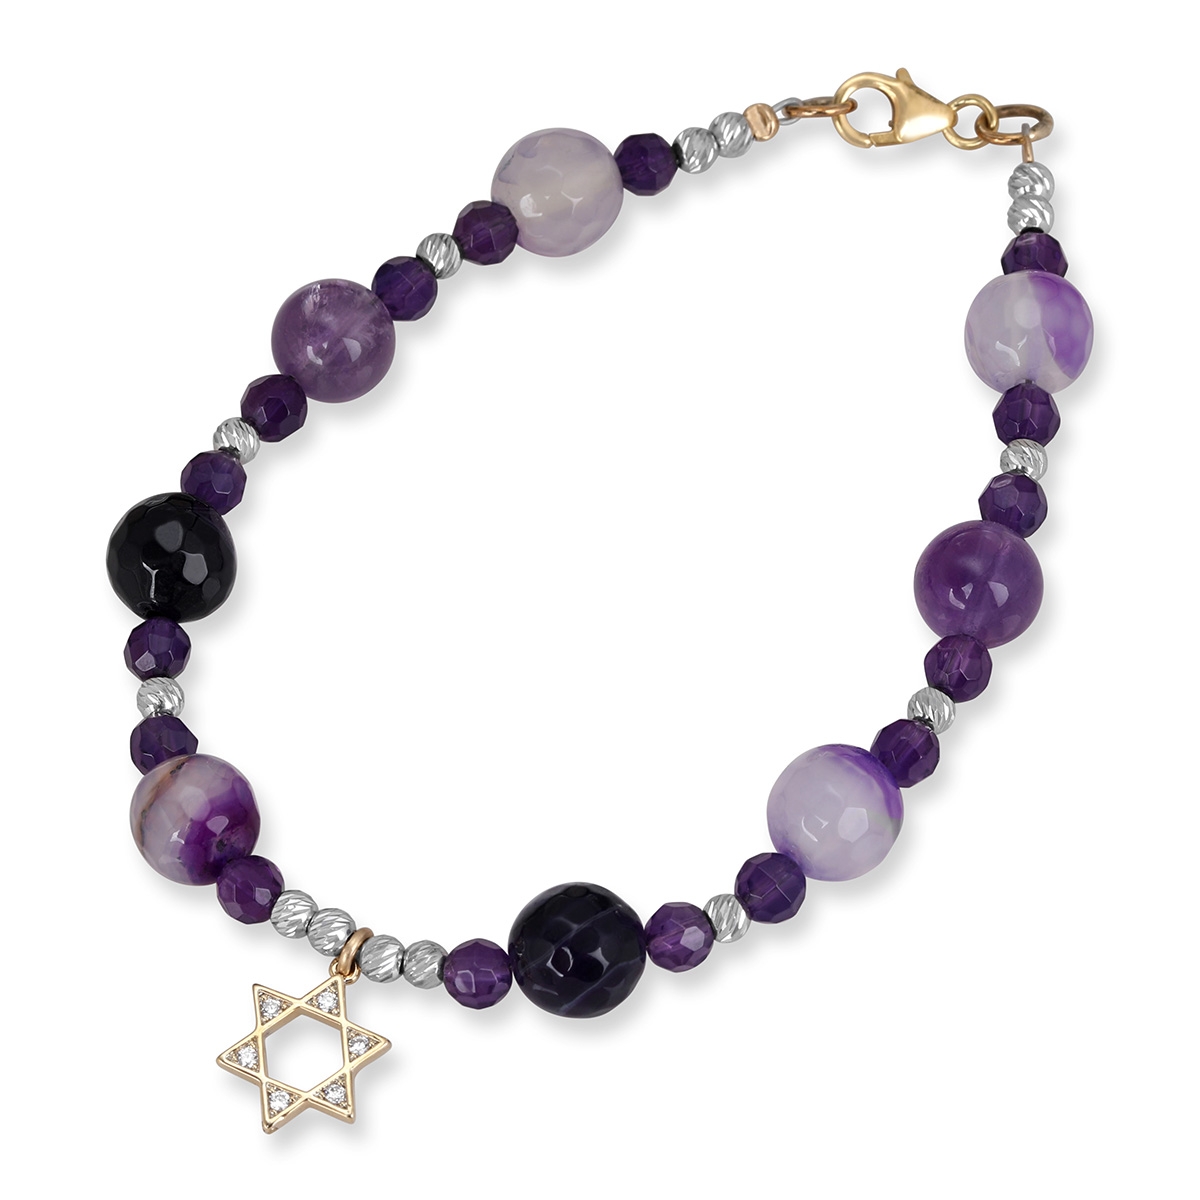 Rafael Jewelry Handcrafted Gold-Filled Star of David Bracelet With Sterling Silver Beads and Agate Stones - 1